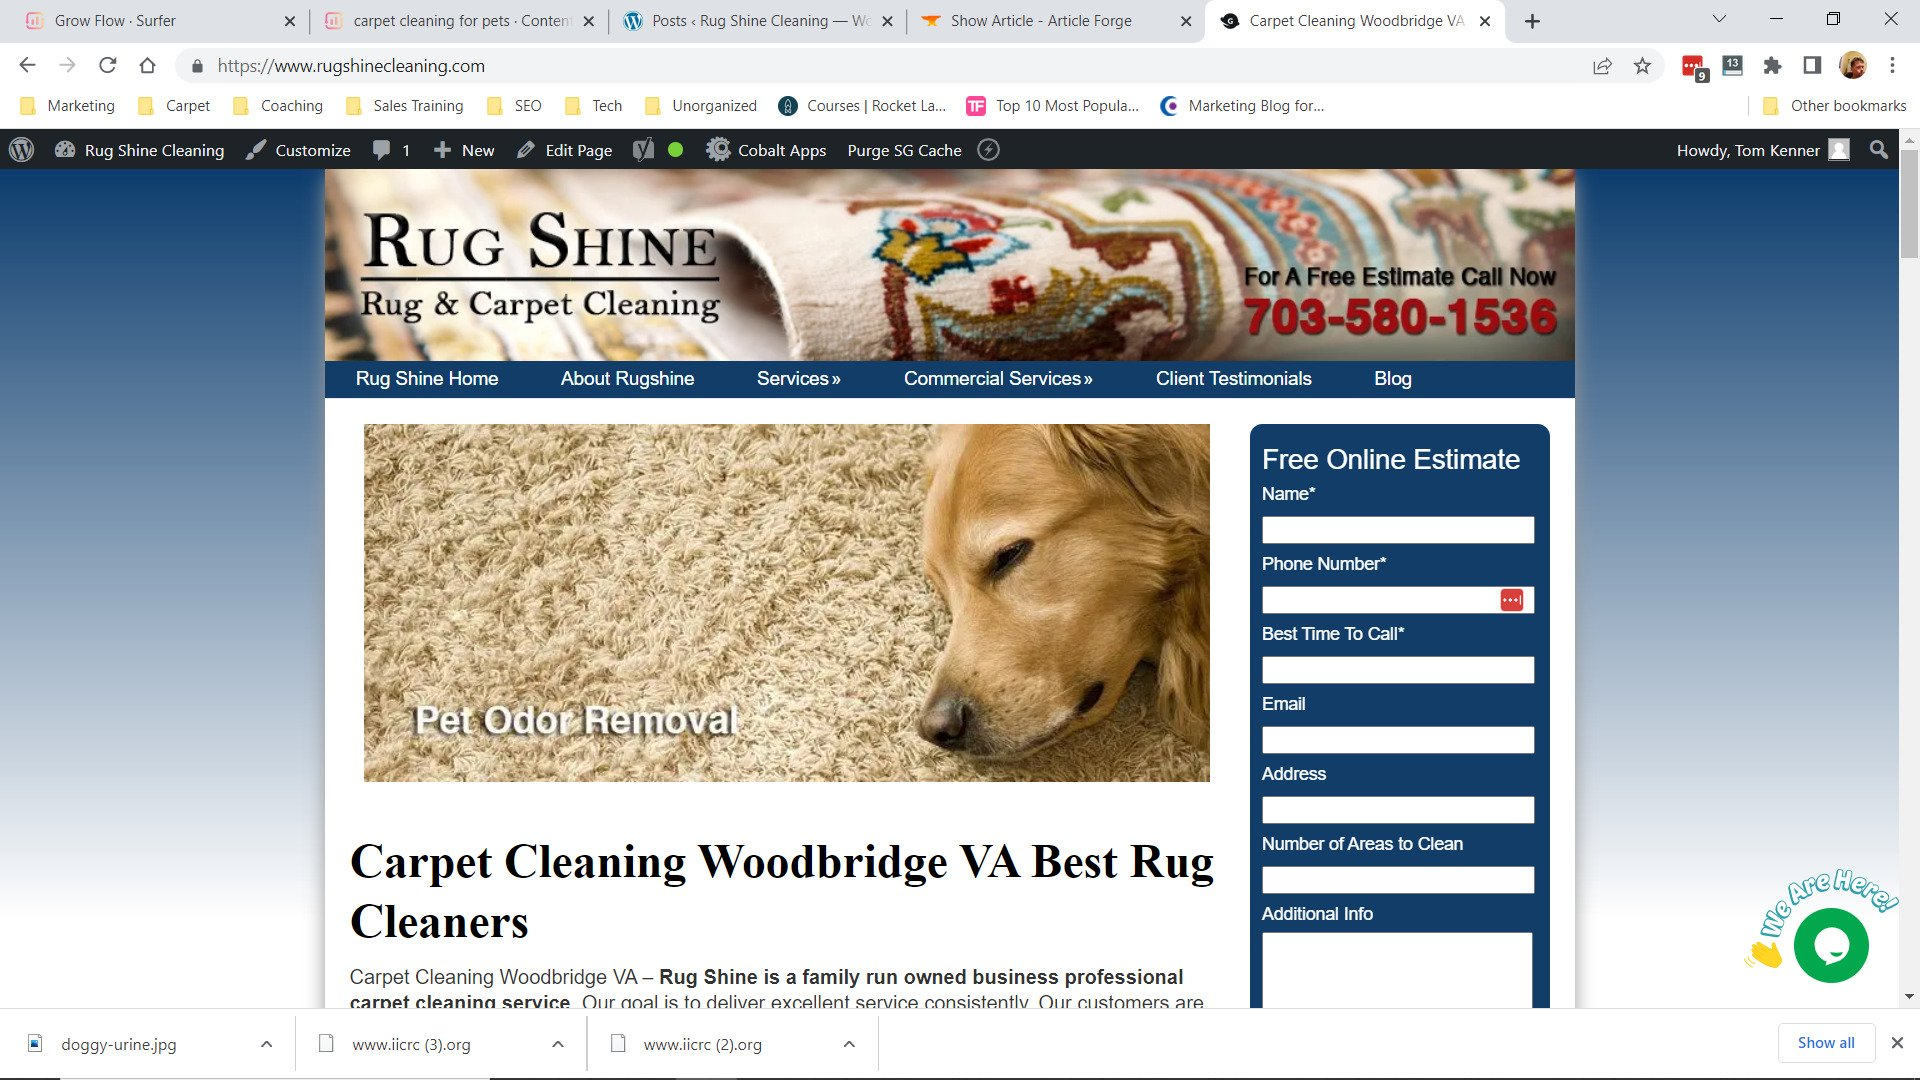 Rug Shine Carpet Cleaning is excellent and efficient in respect to cleaning the carpets in your house.